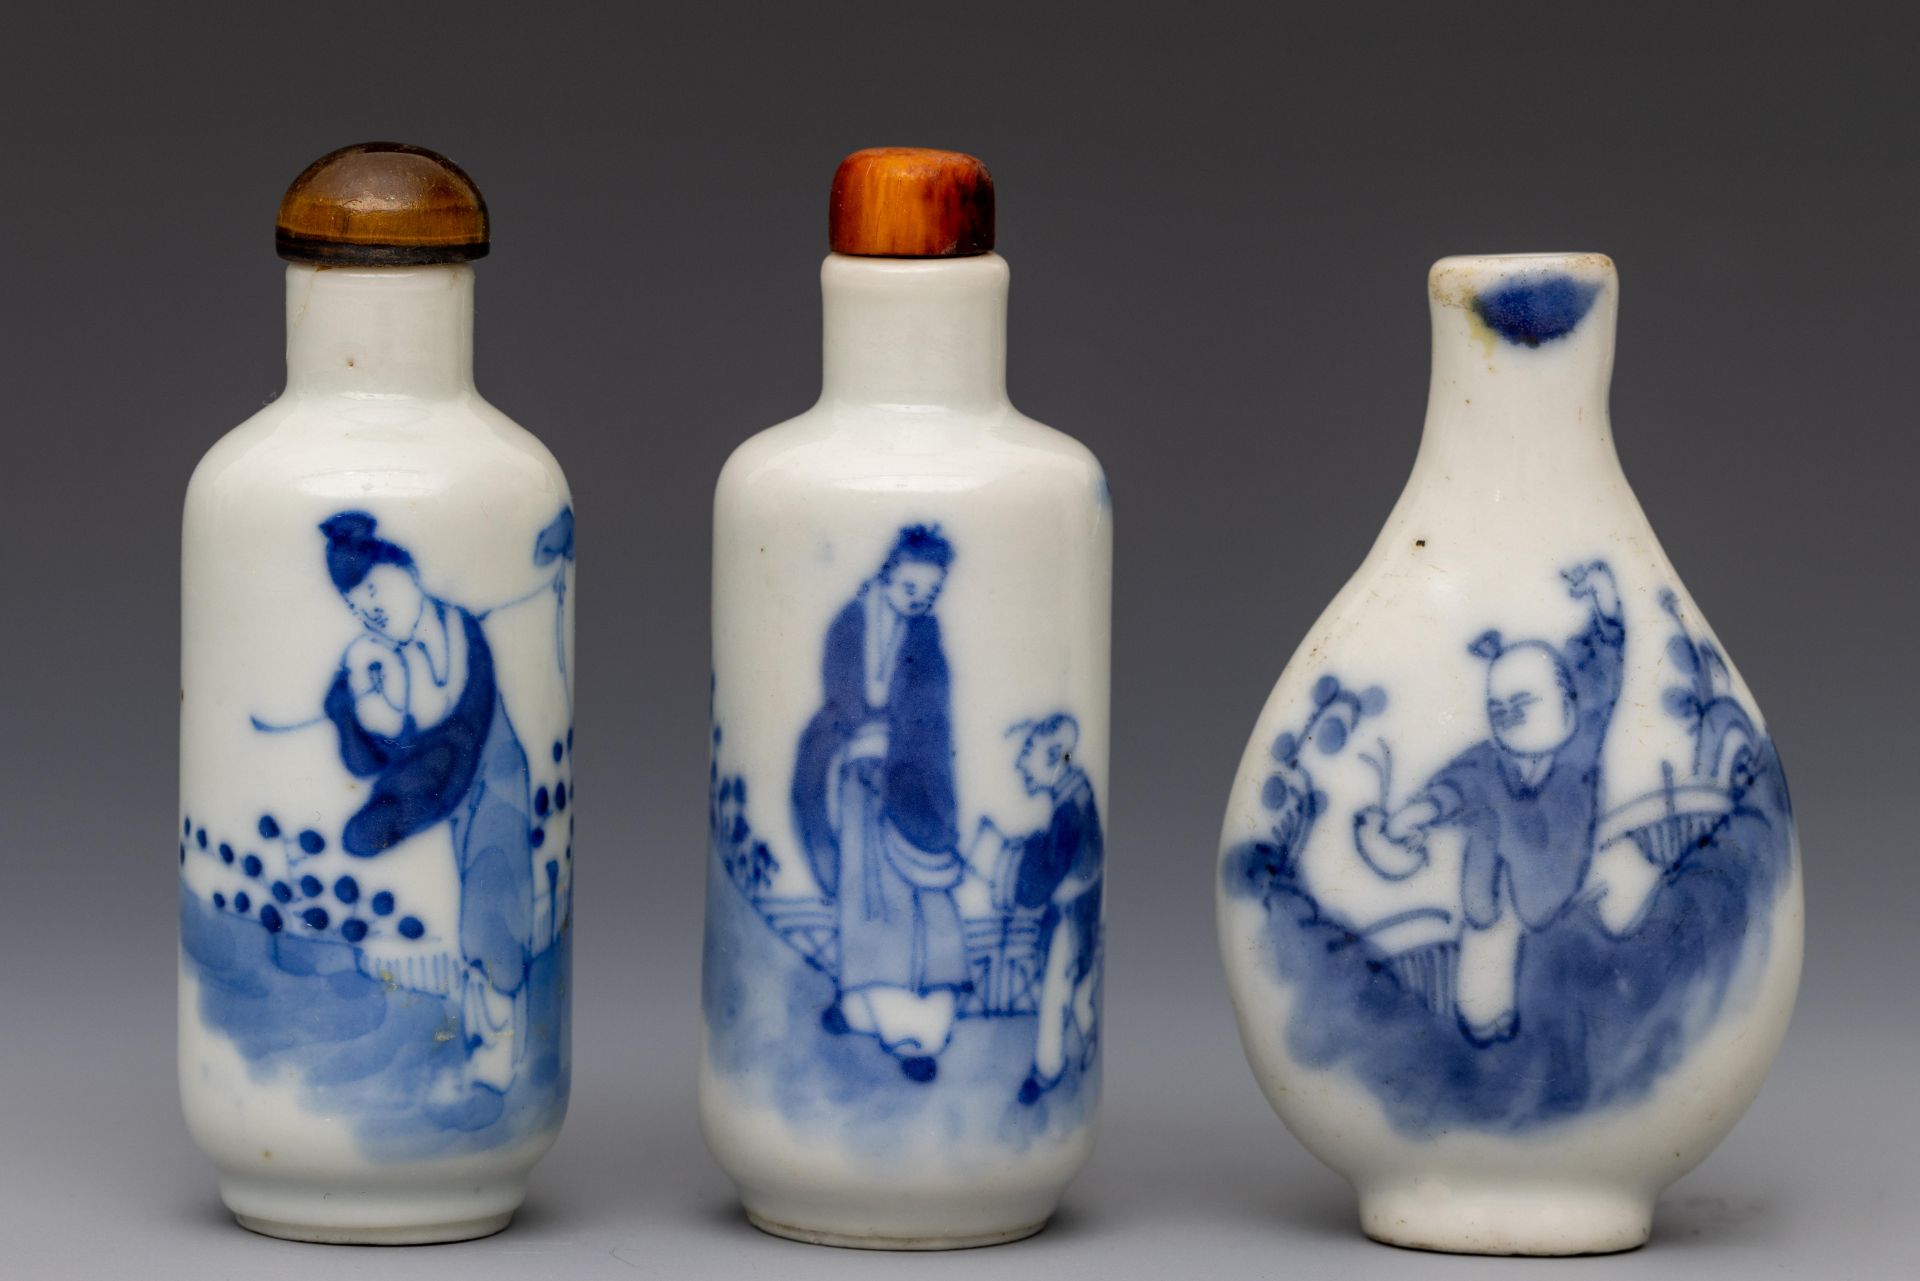 China, three blue and white porcelain figural snuff bottles and two stoppers, 19th-20th century,